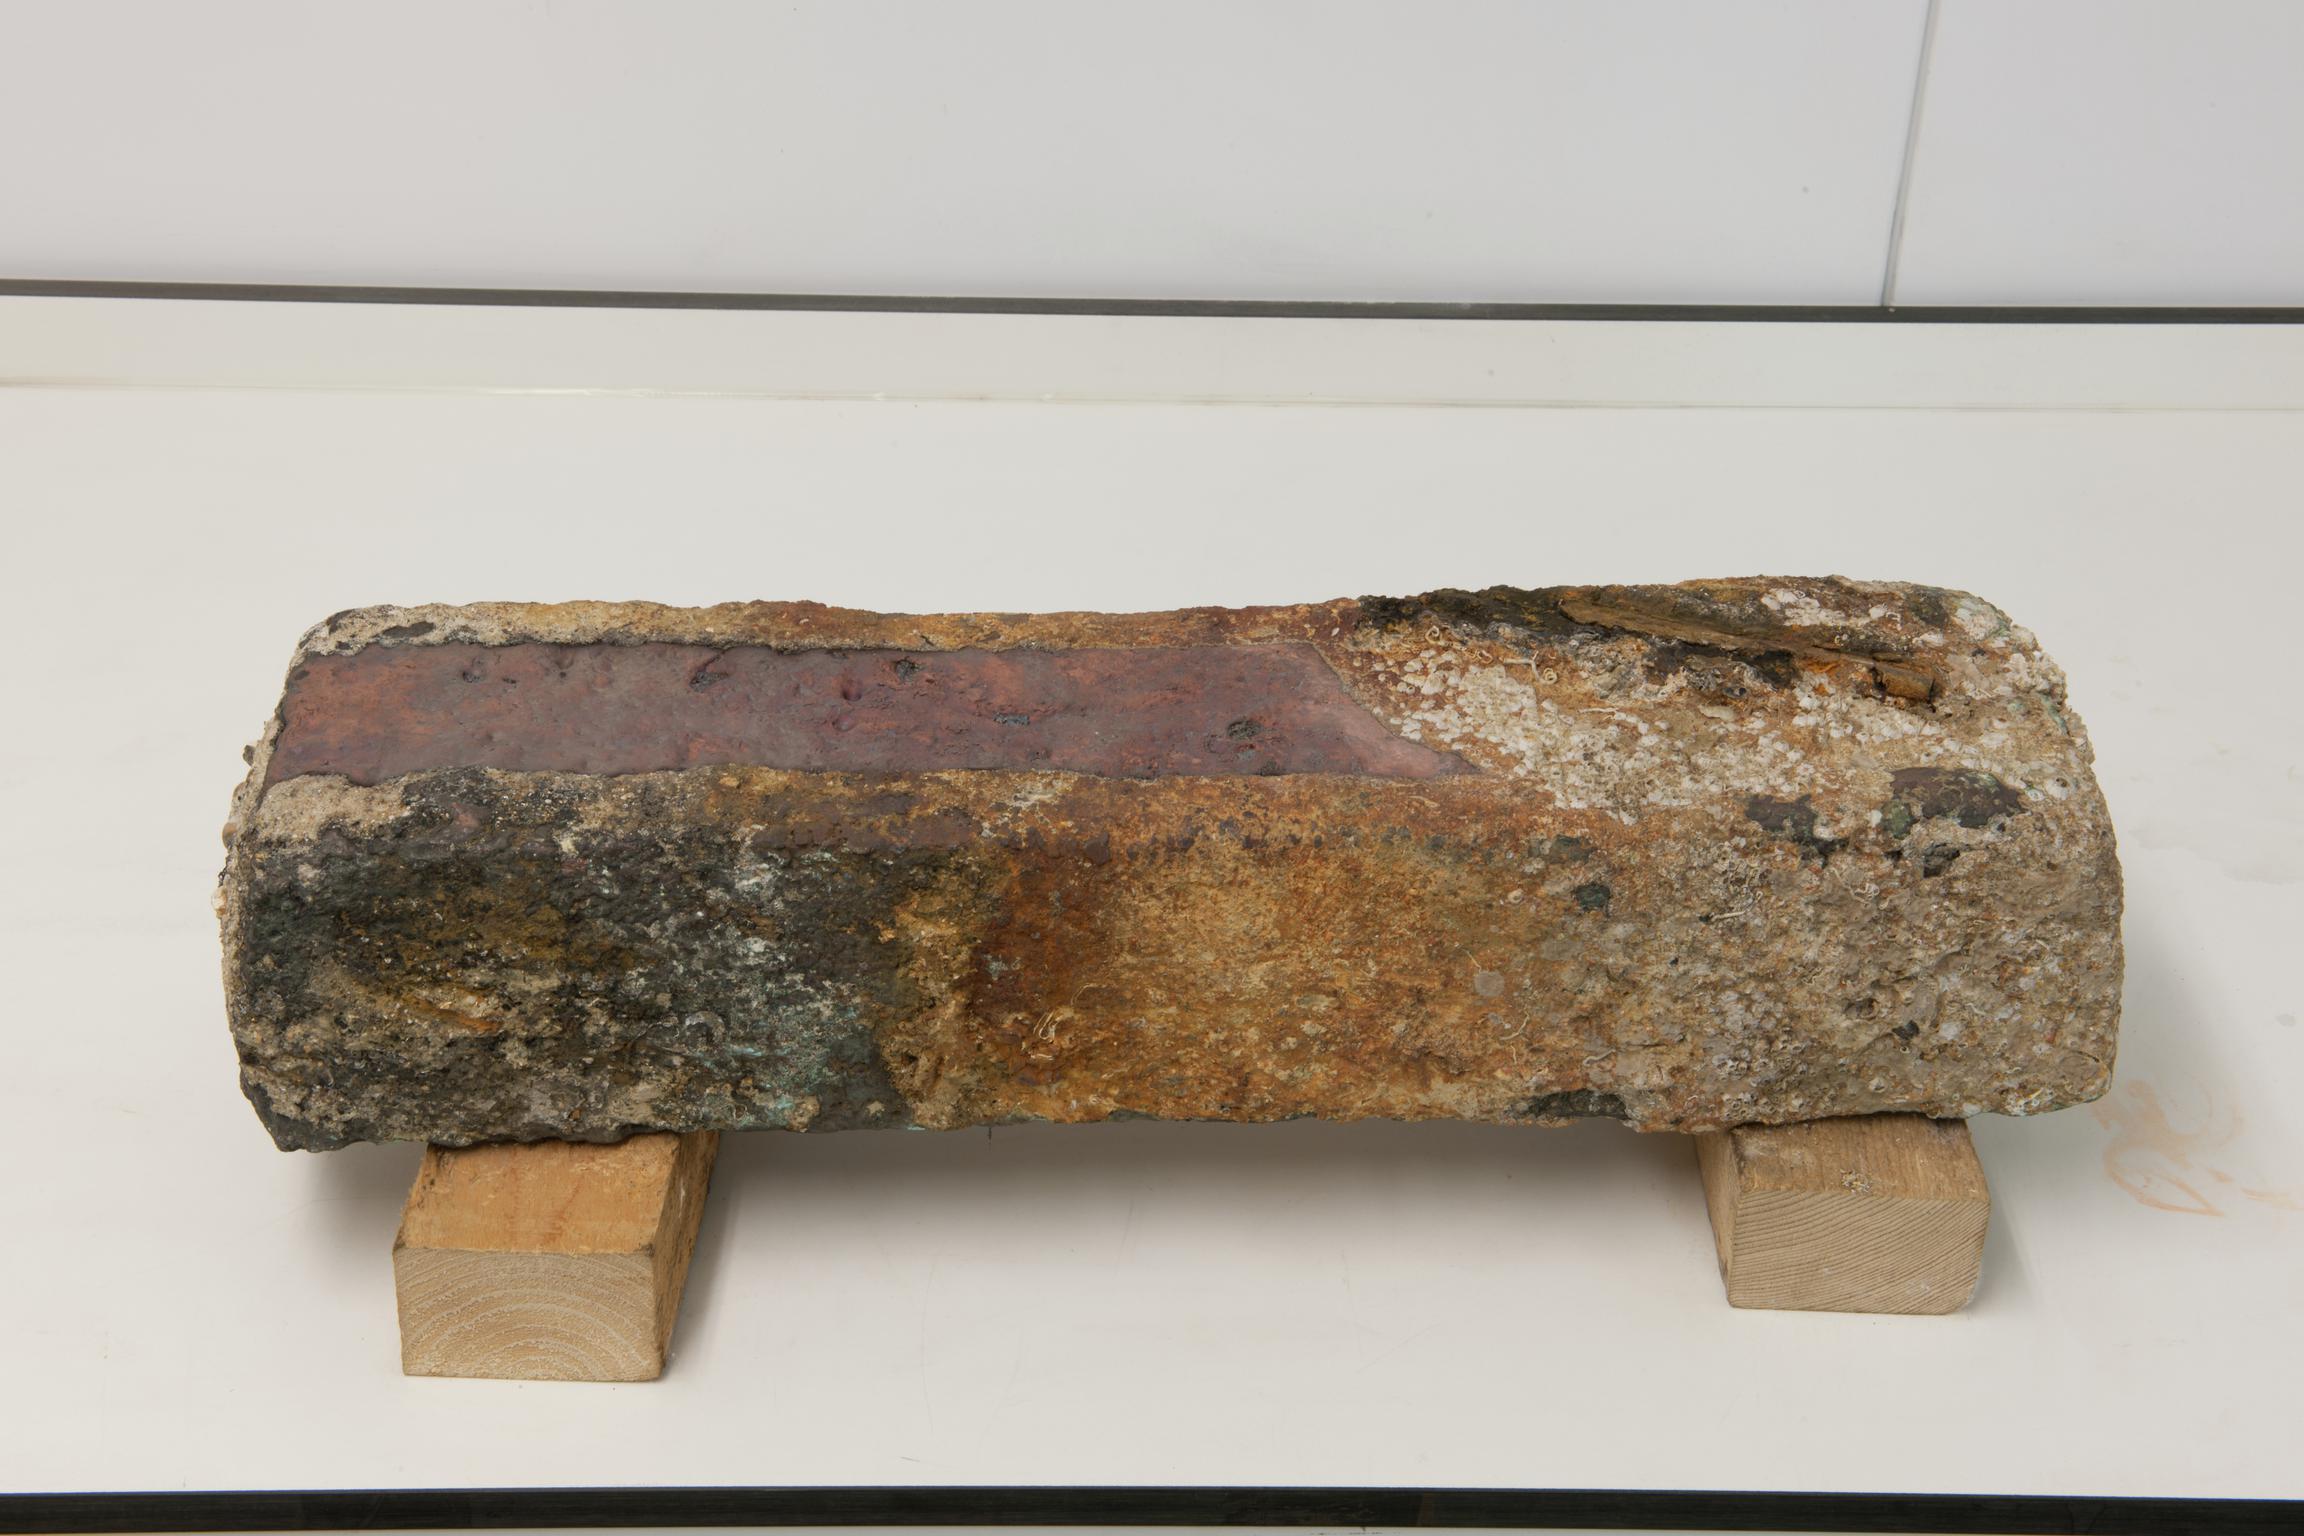 Copper "chili block" from wreck of S.S. LAPWING